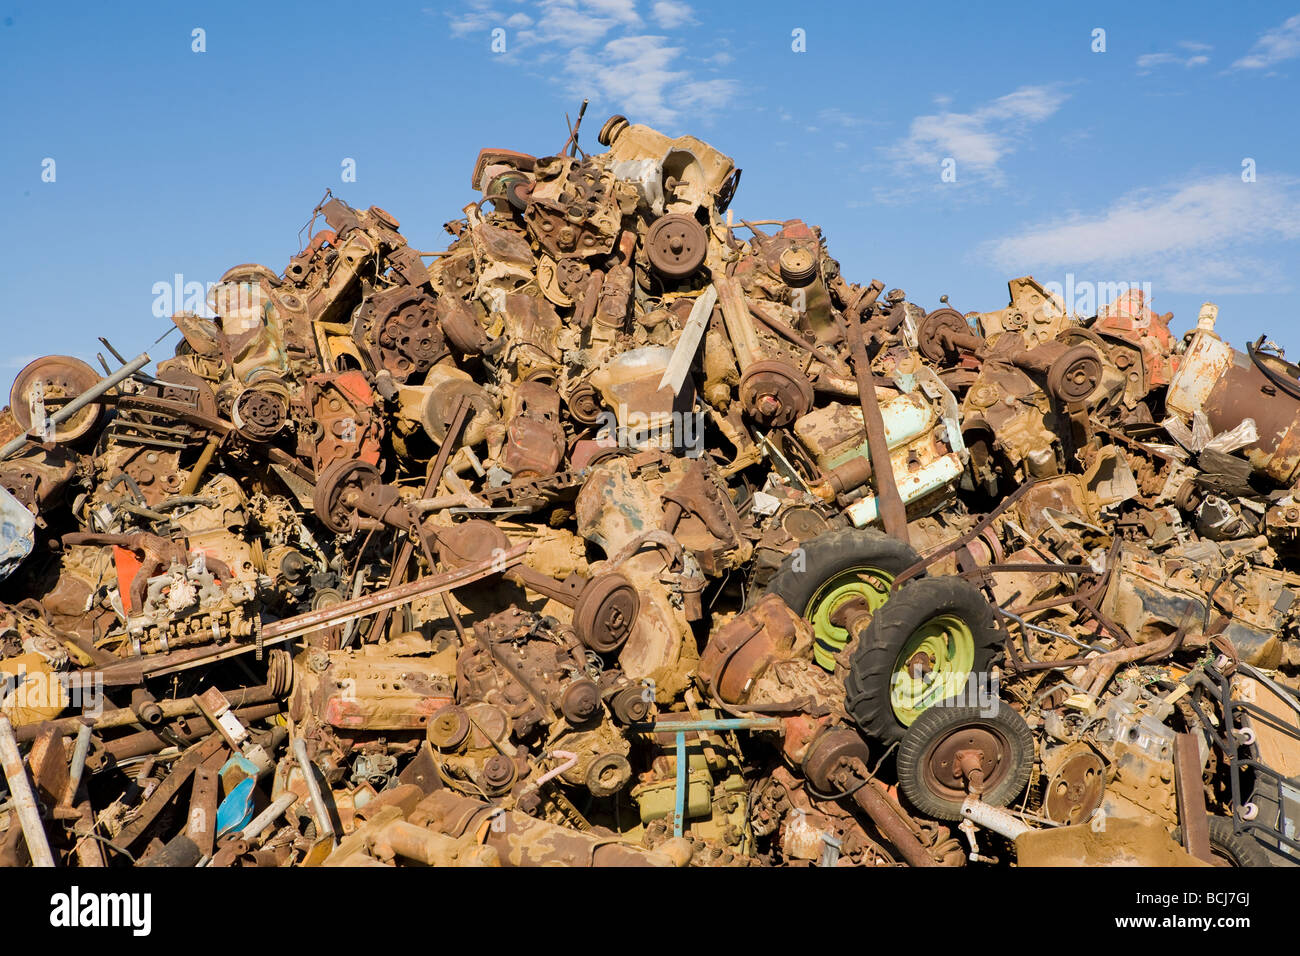 Stack pile of rusted metal car parts including wheels axles tires against sky Barstow California USA Stock Photo